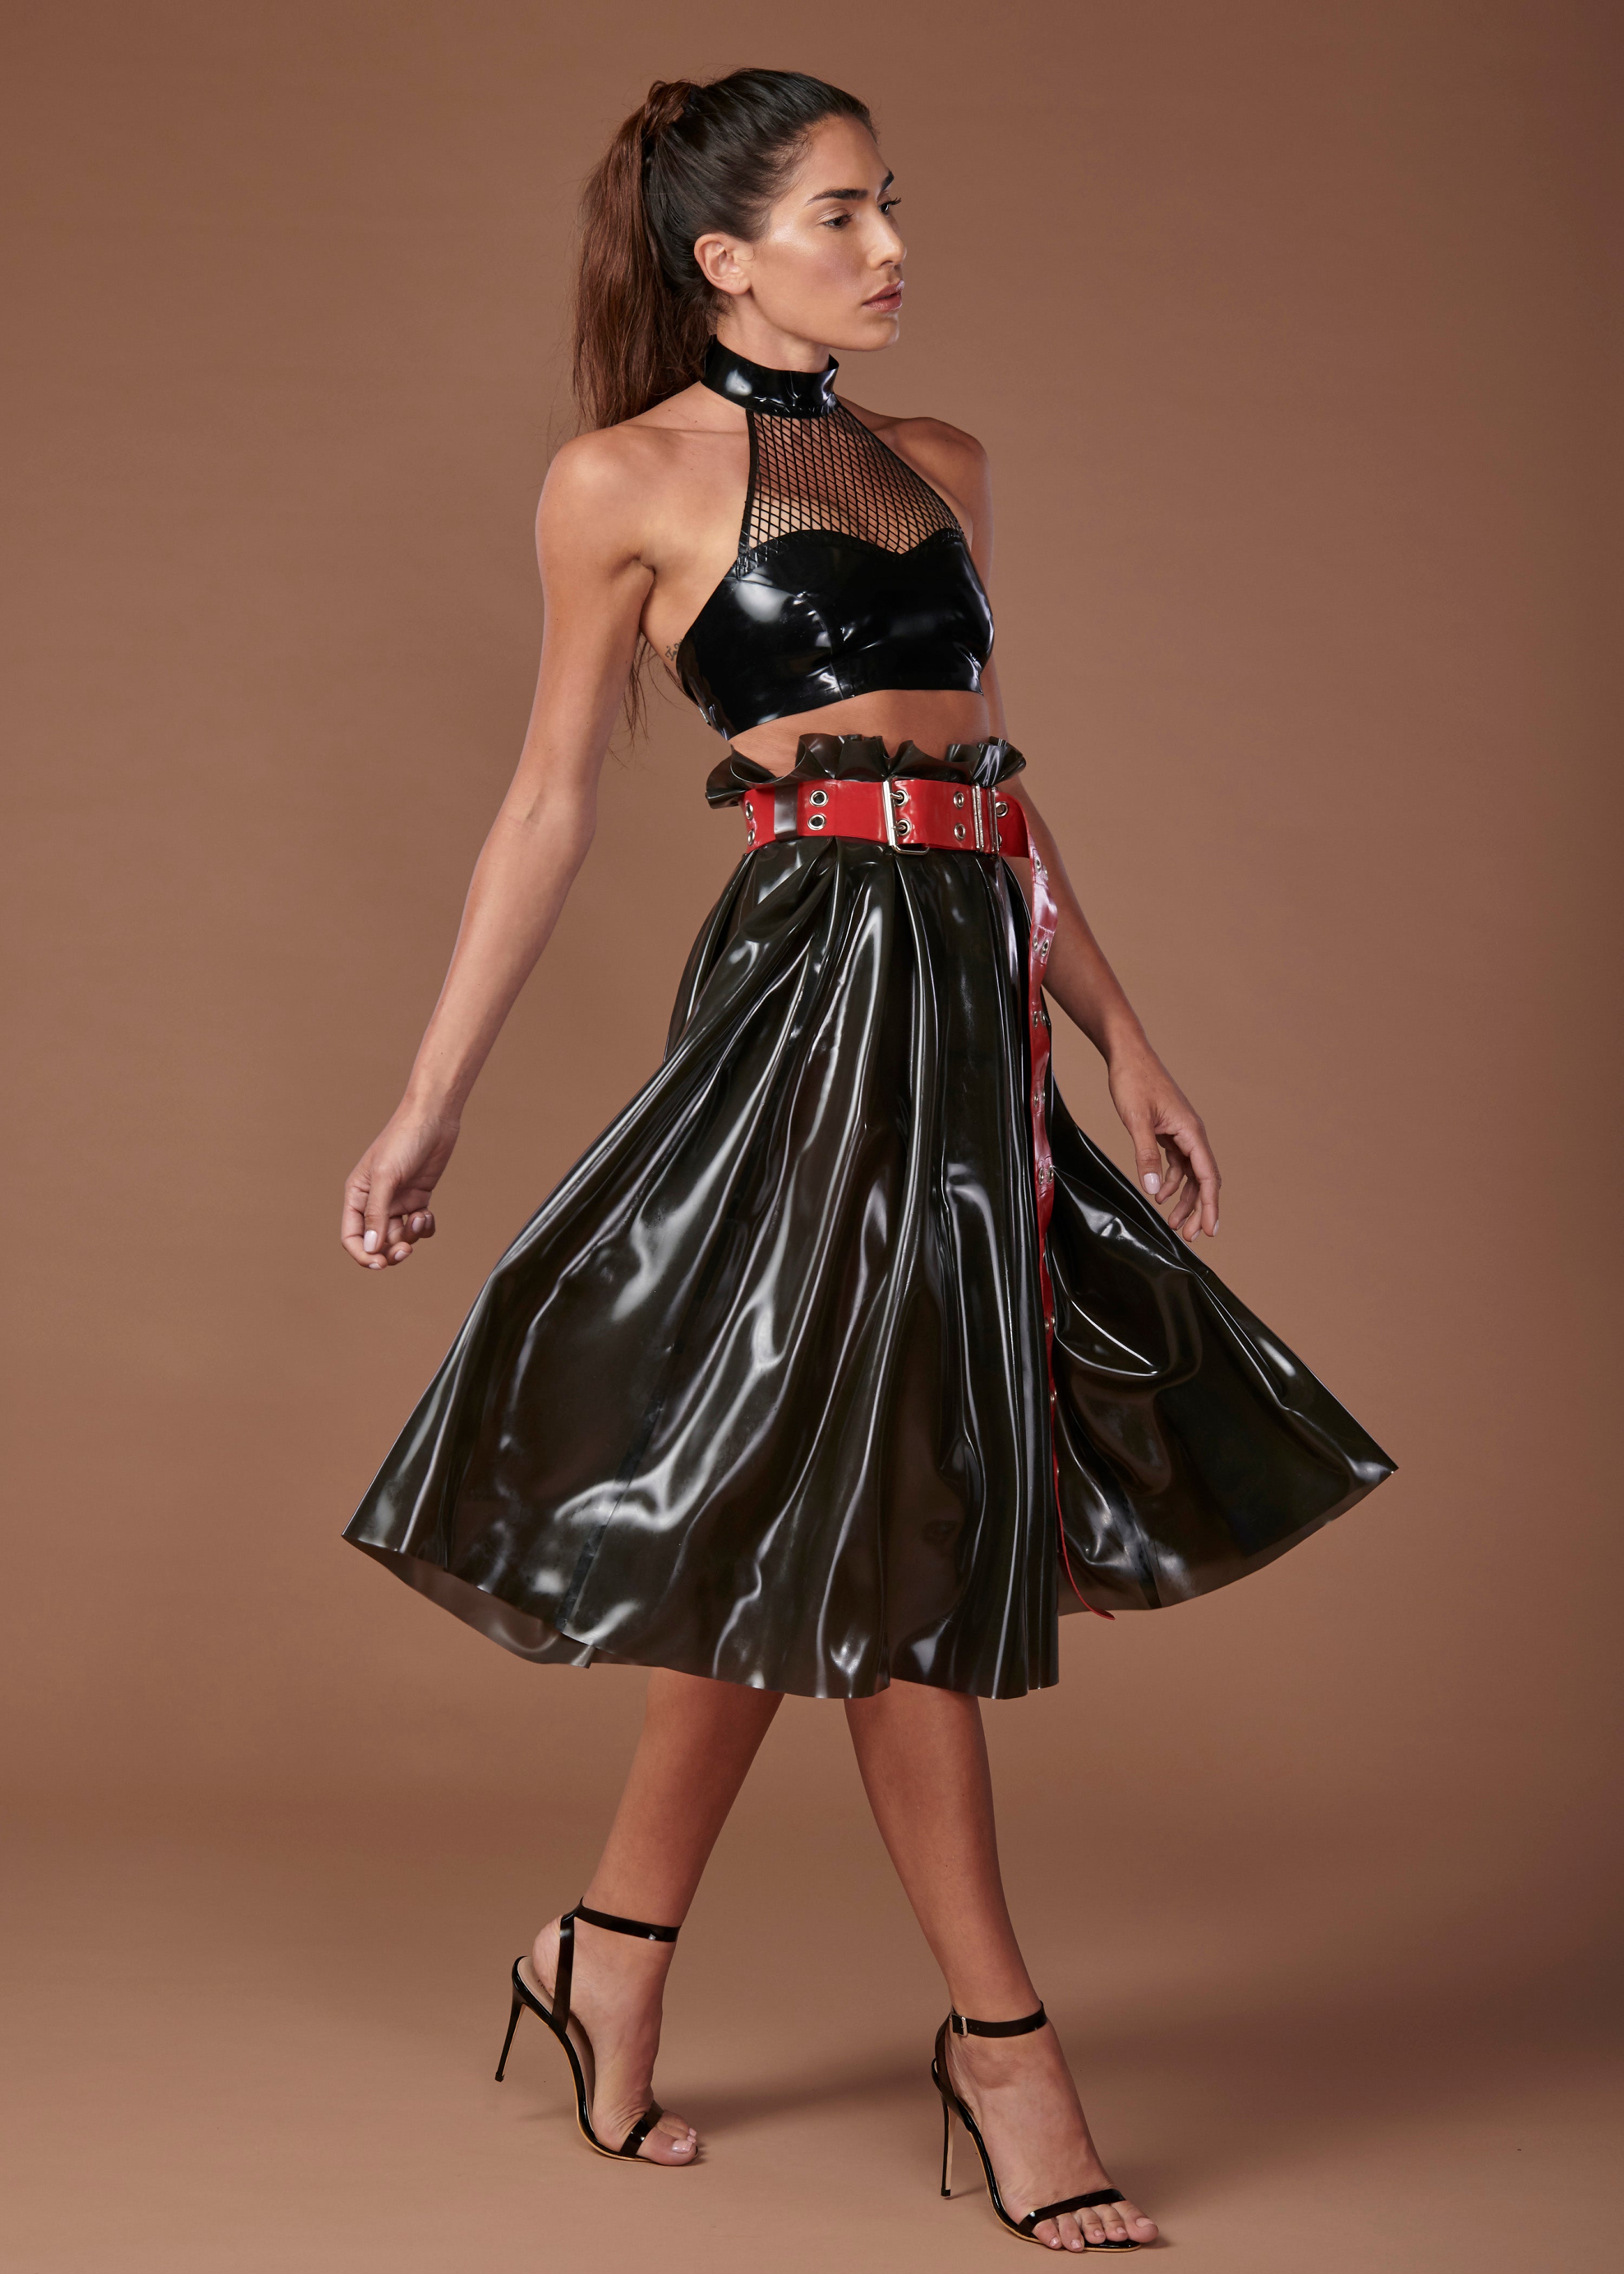 Latex Rubber Skirts And Pants For Women By Vex Clothing Custom Made Or Ready To Wear Vex Inc 